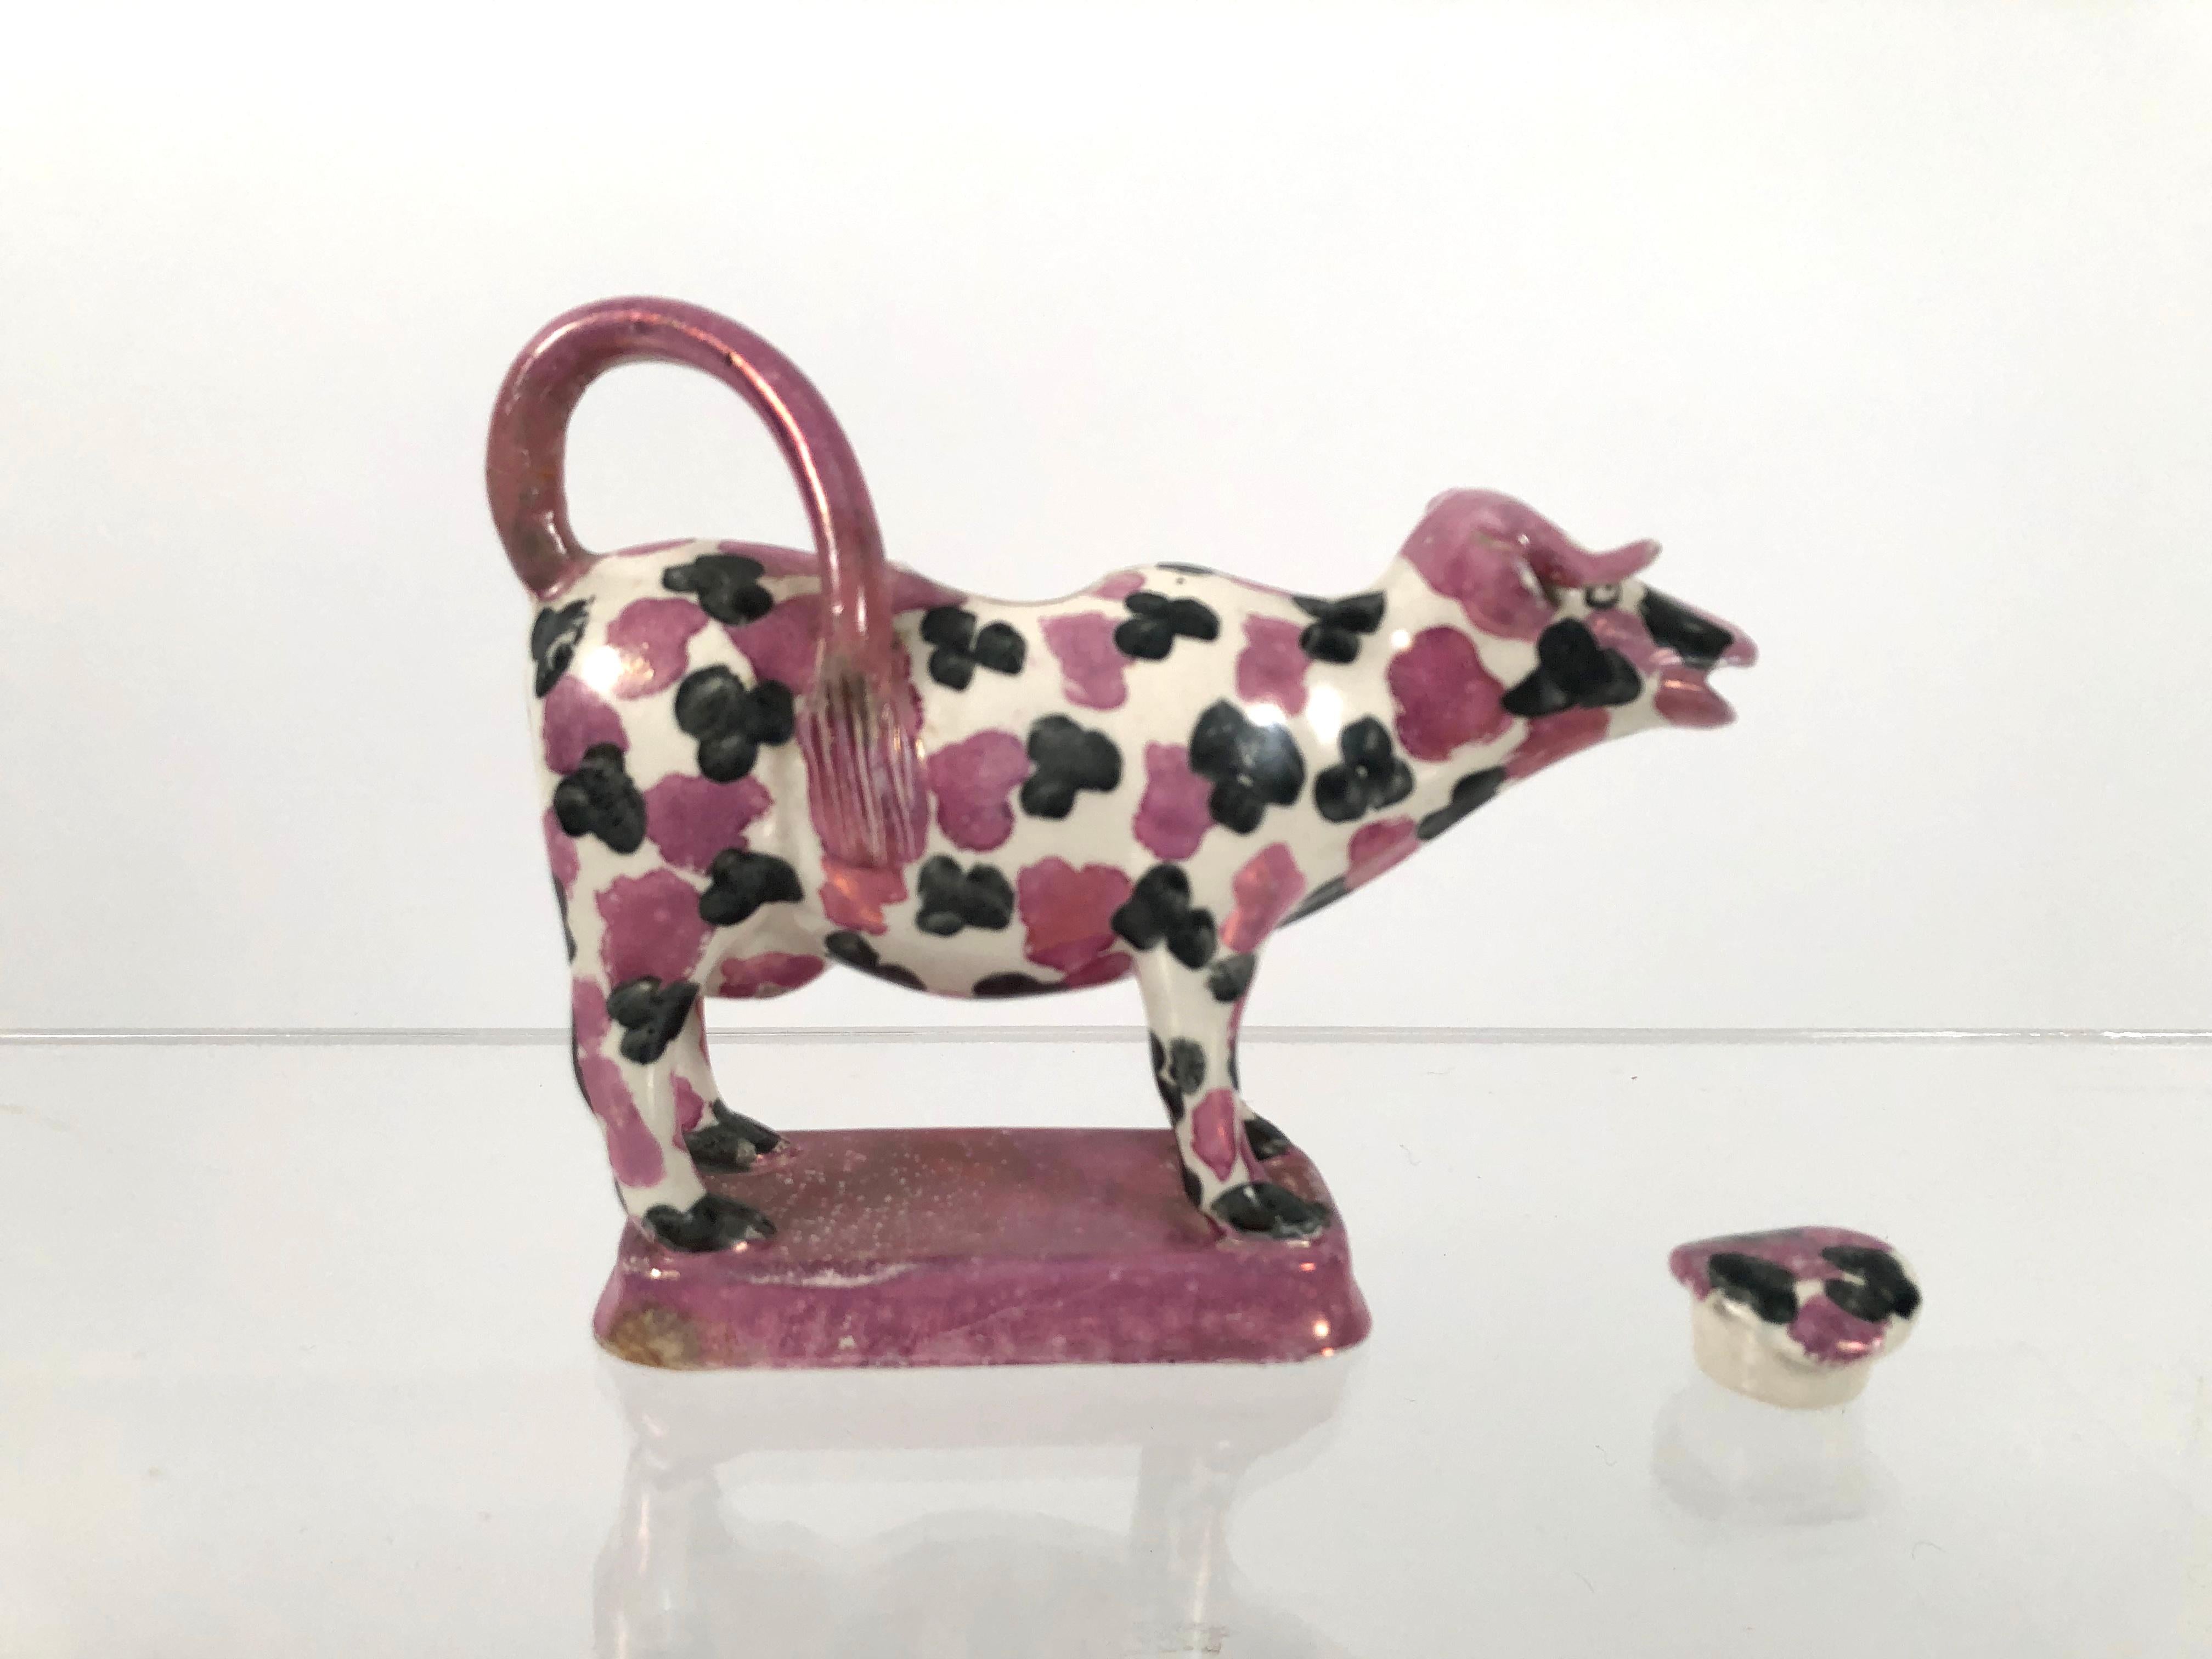 Earthenware Staffordshire Pottery Pink Lustreware Spotted Cow Creamer, English, circa 1810